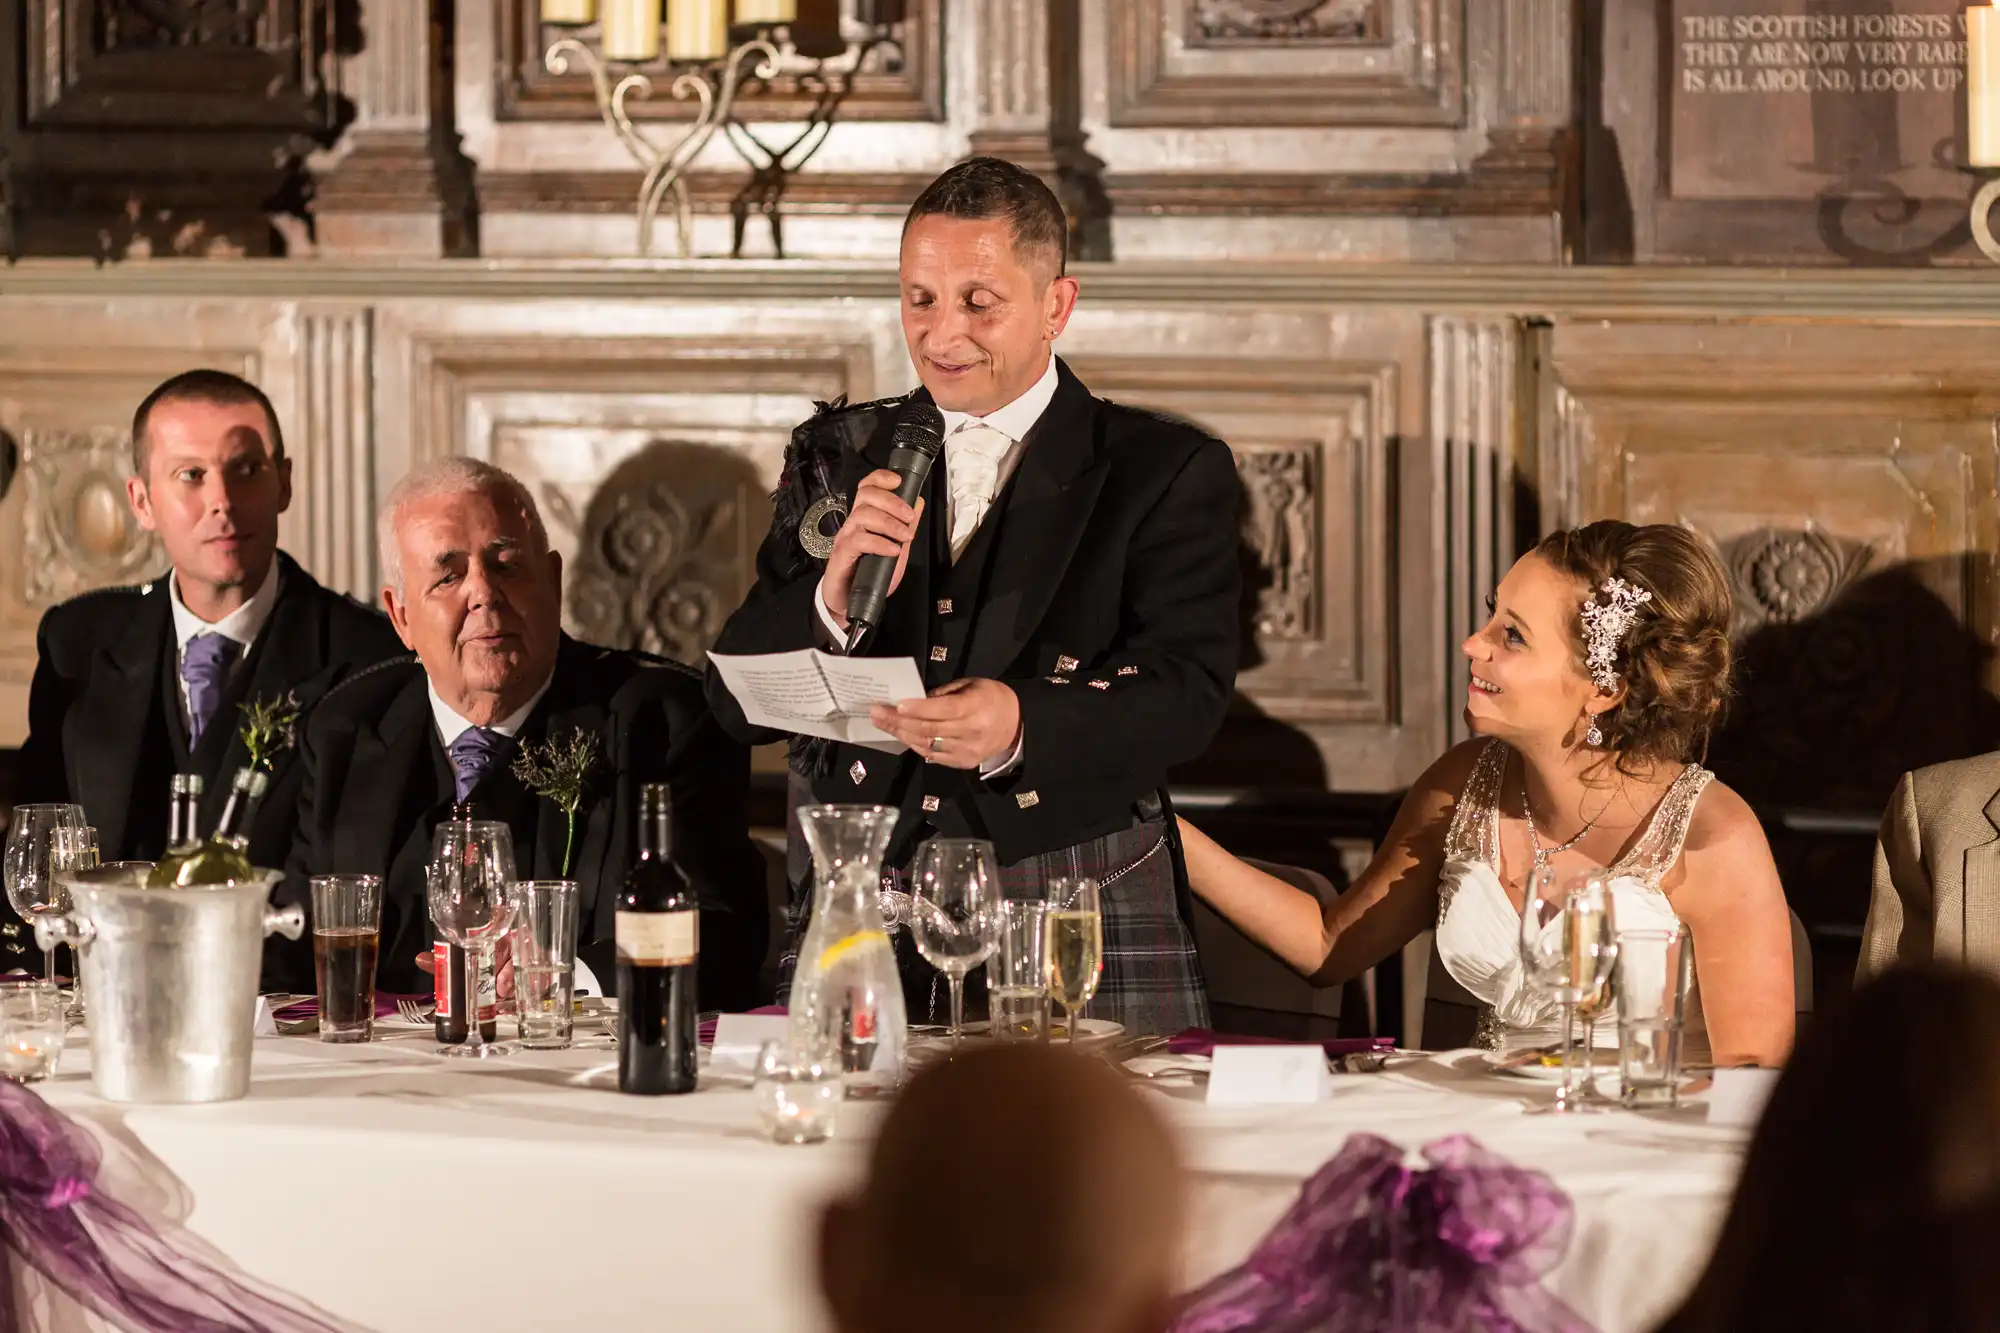 A man in a kilt gives a speech at a wedding reception while holding a microphone, with seated guests listening attentively.